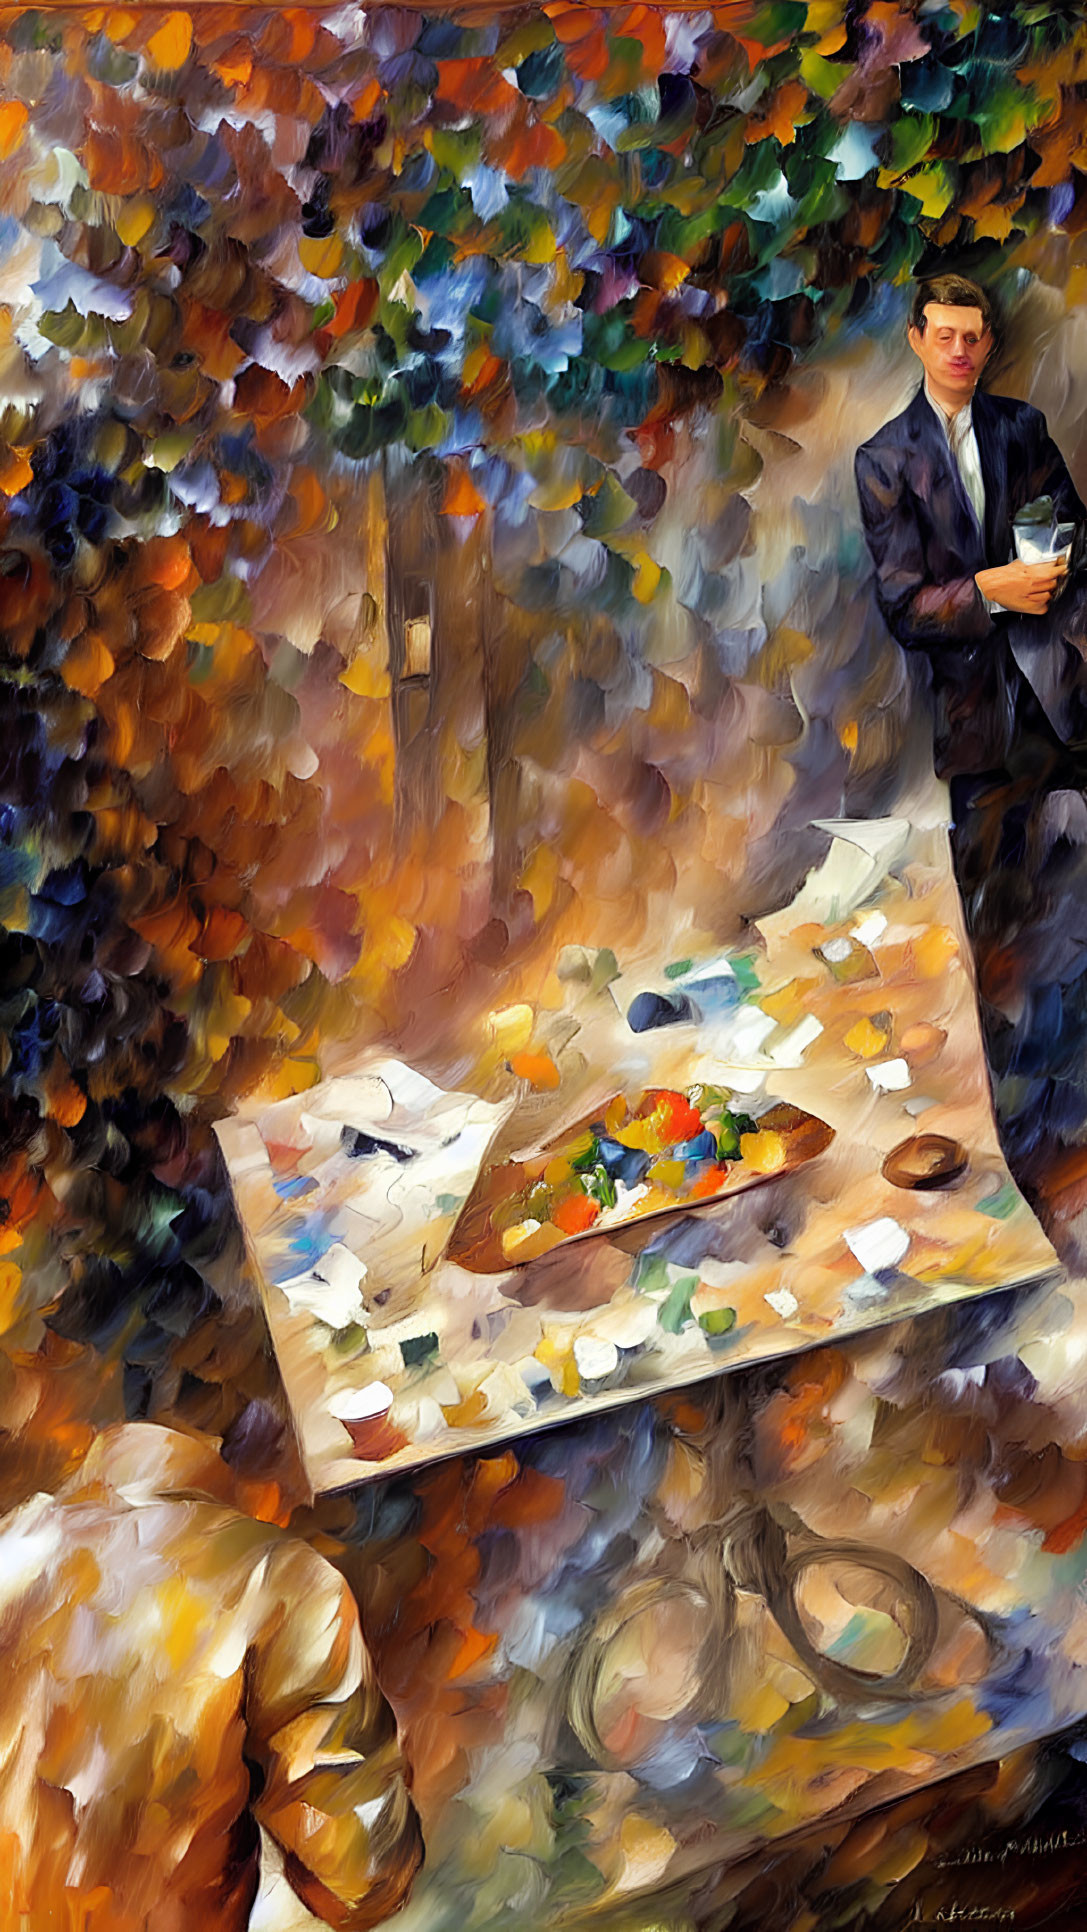 Man in Suit Beside Art Table in Warm, Autumnal Room